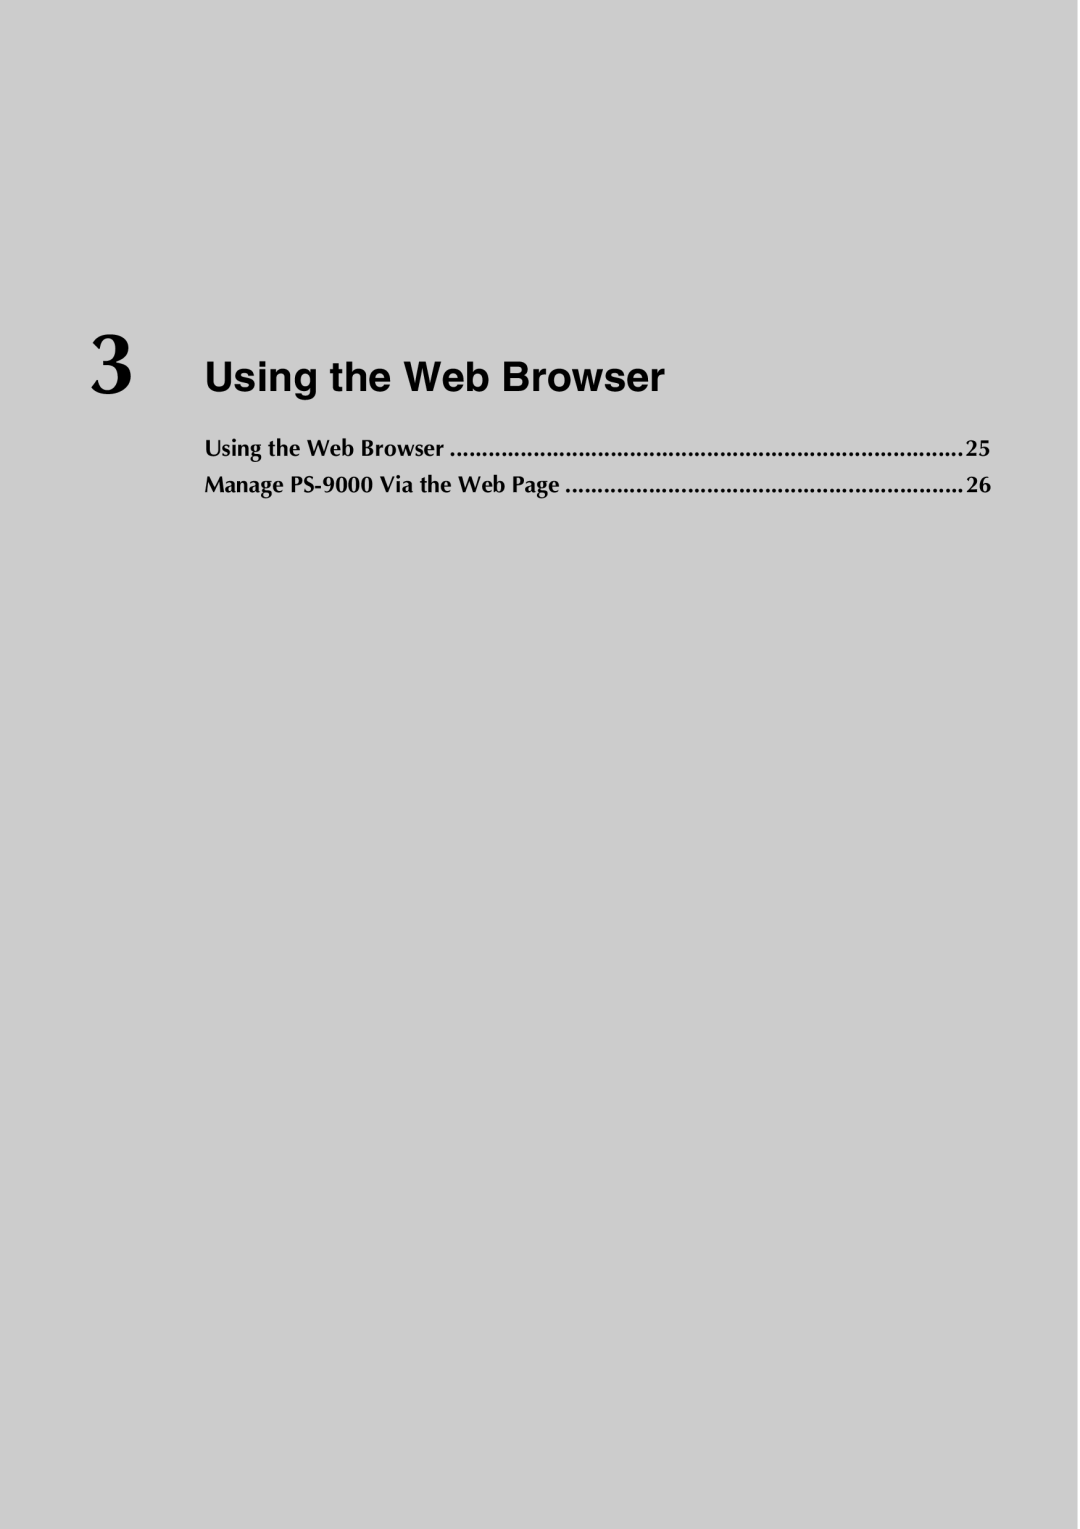 Brother user manual Using the Web Browser, Manage PS-9000 Via the Web Page 